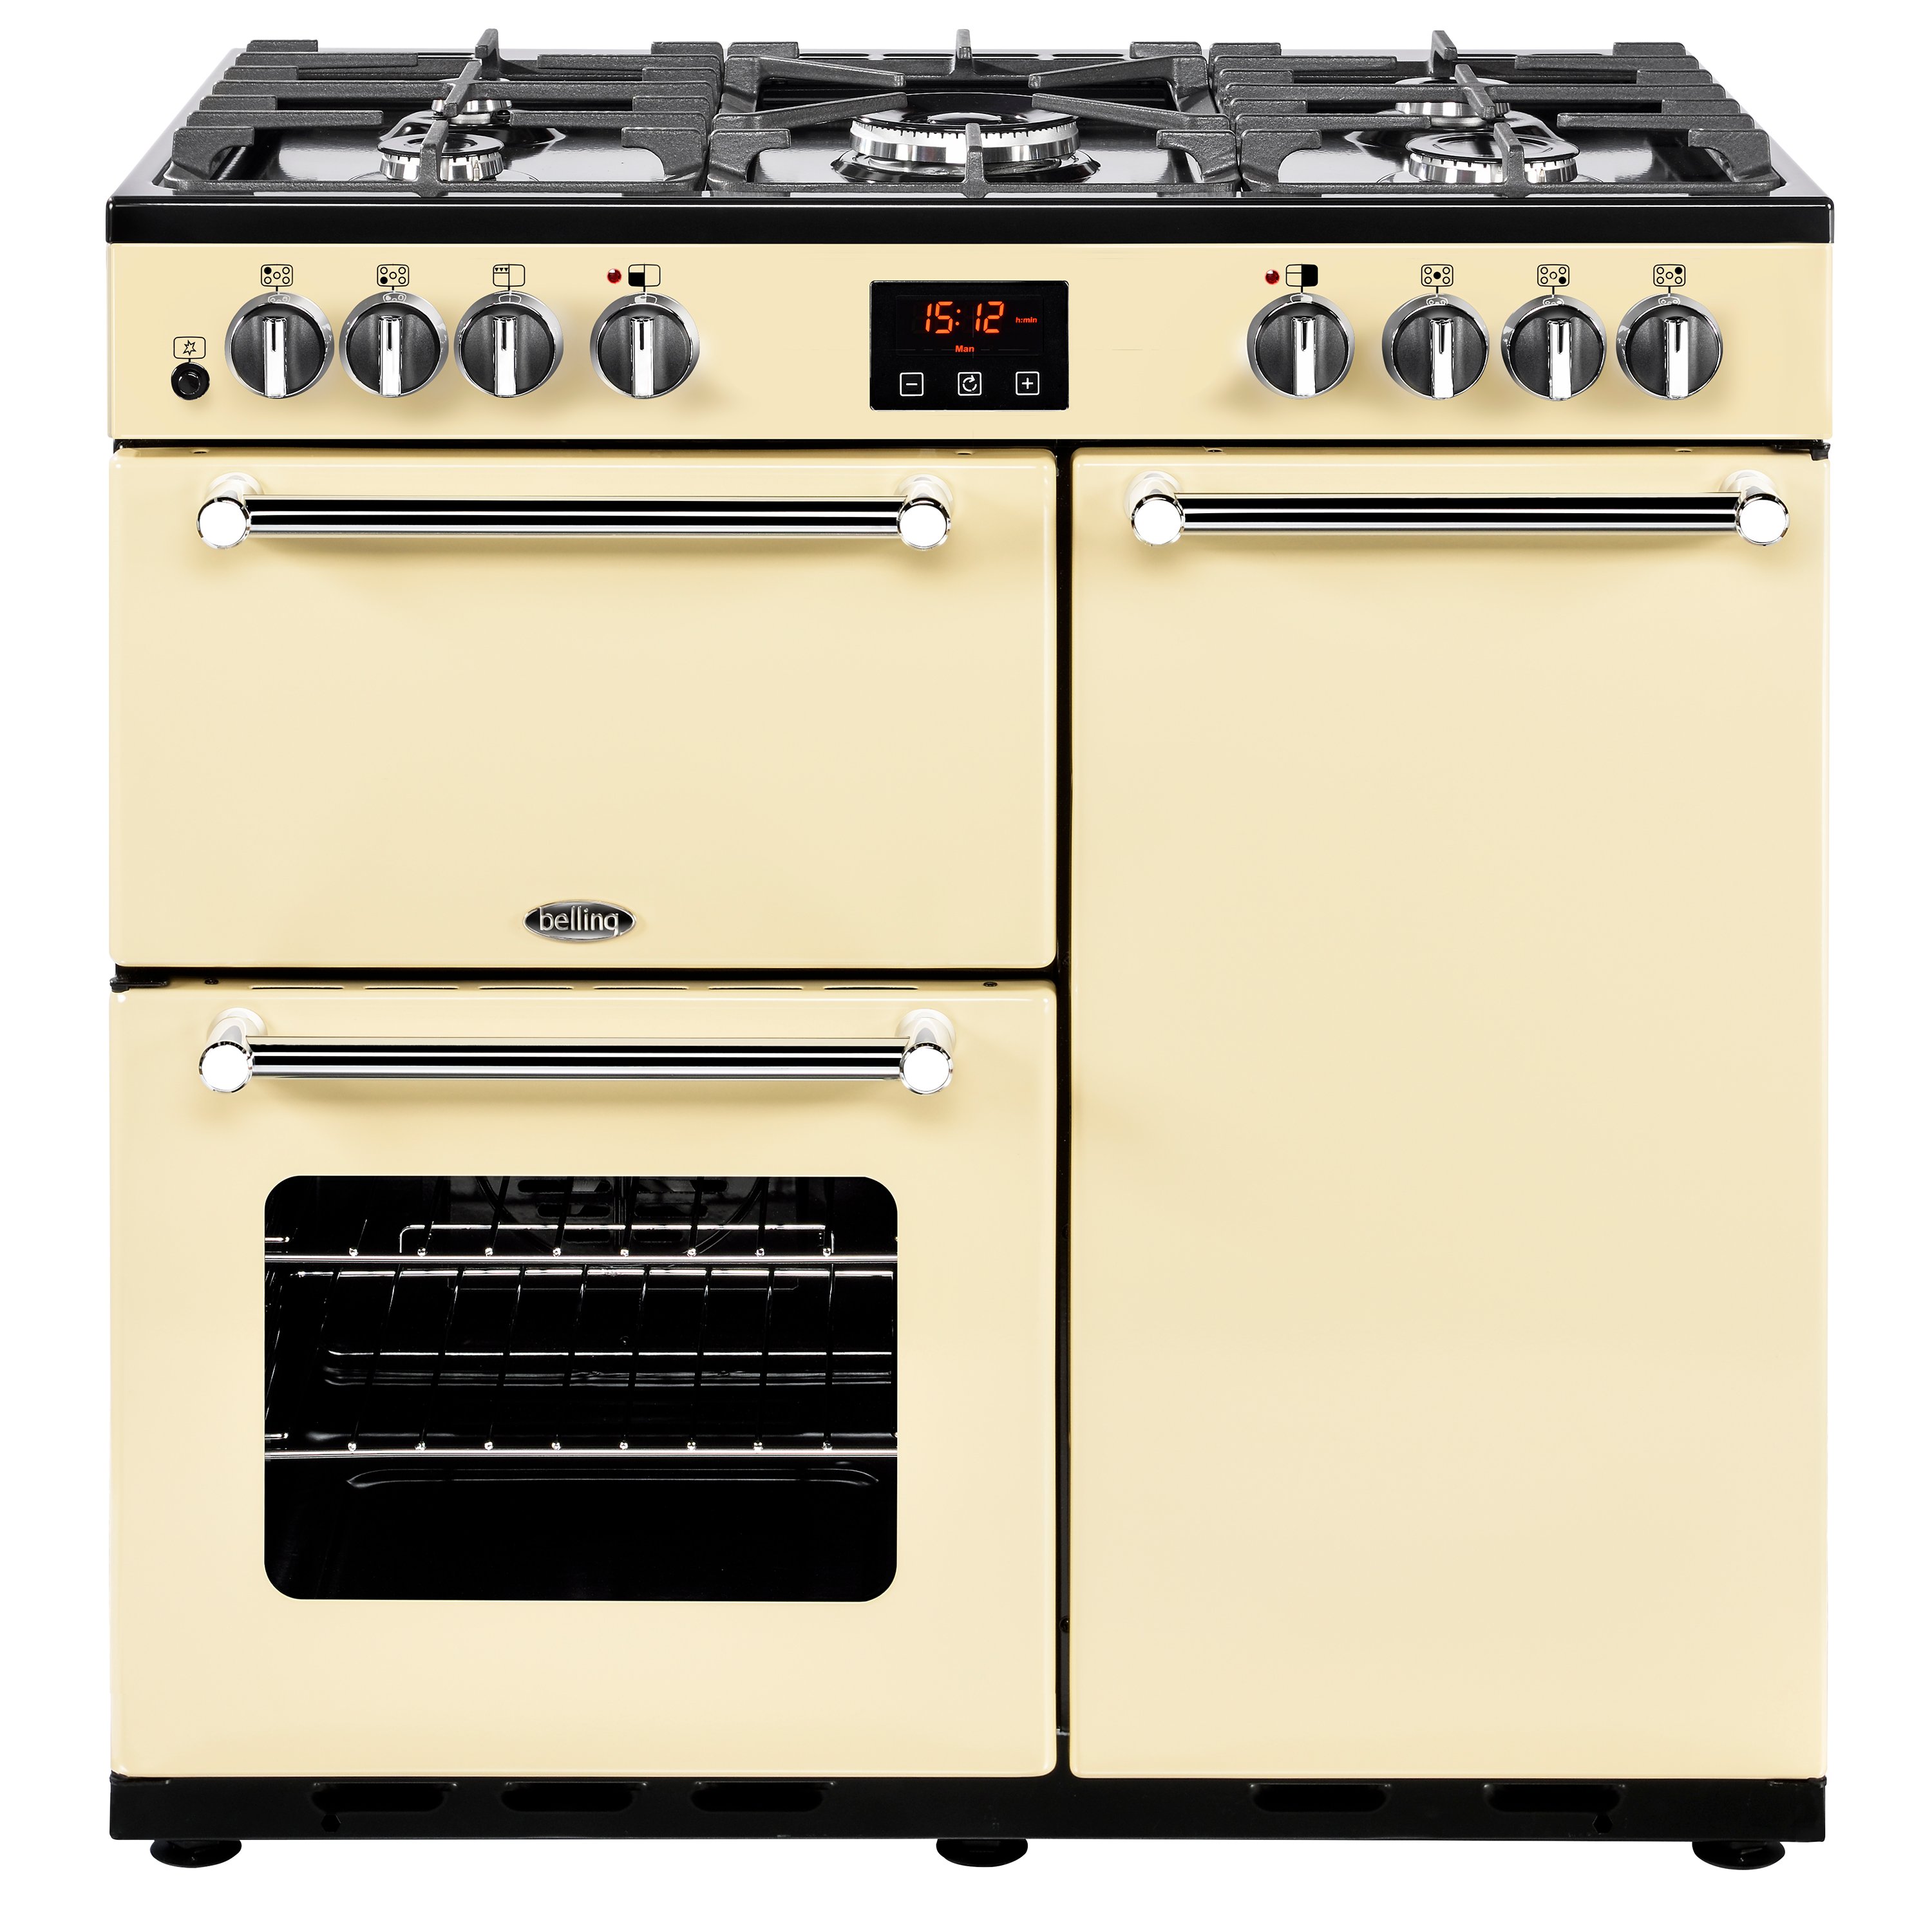 90cm dual fuel range cooker with 5 burner gas hob, conventional electric oven & grill, fanned main oven and tall fanned oven.